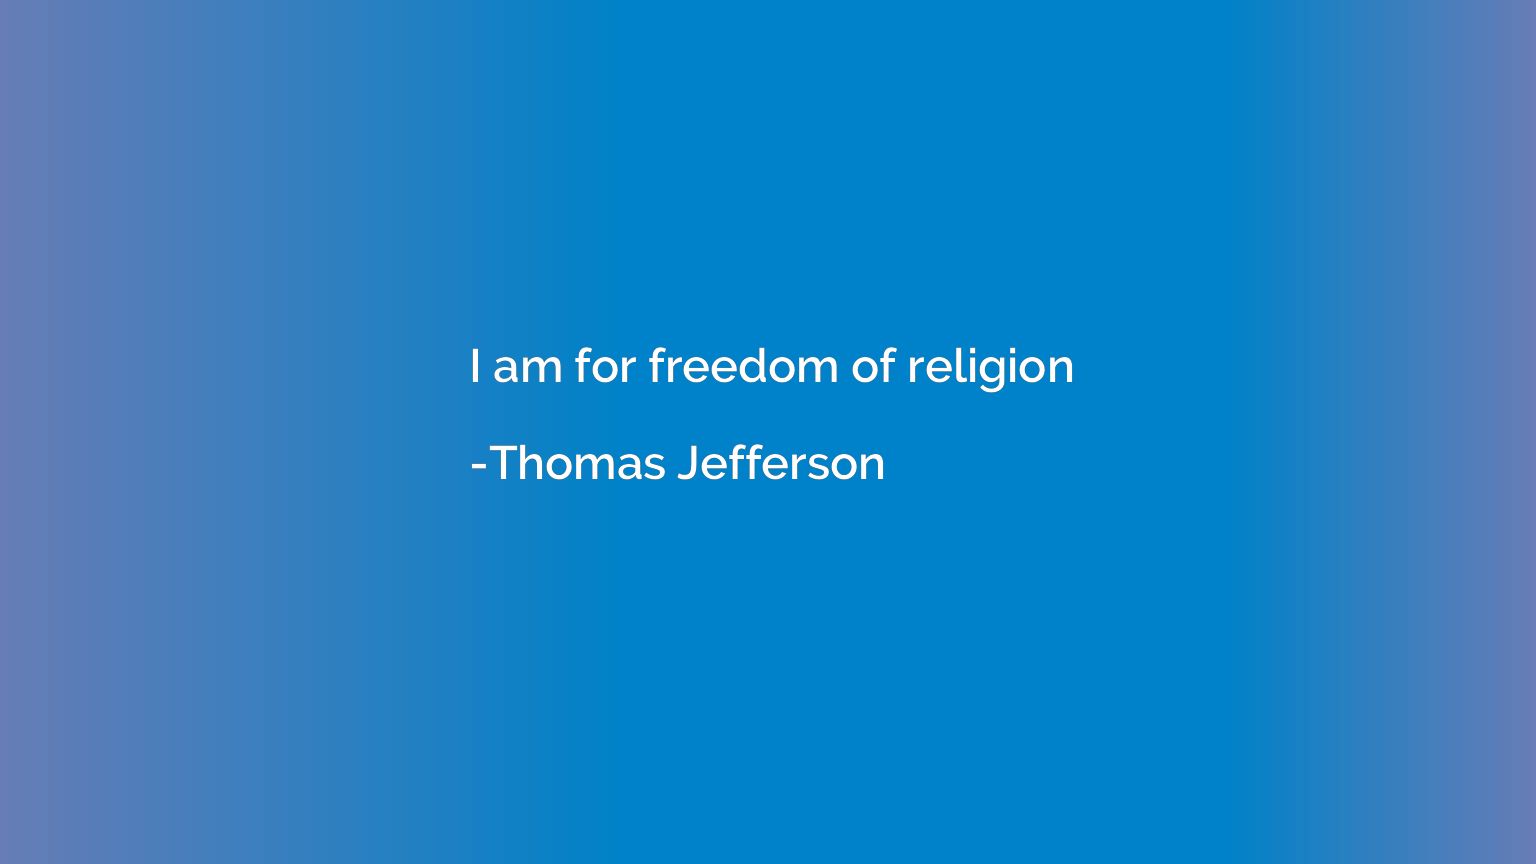 I am for freedom of religion